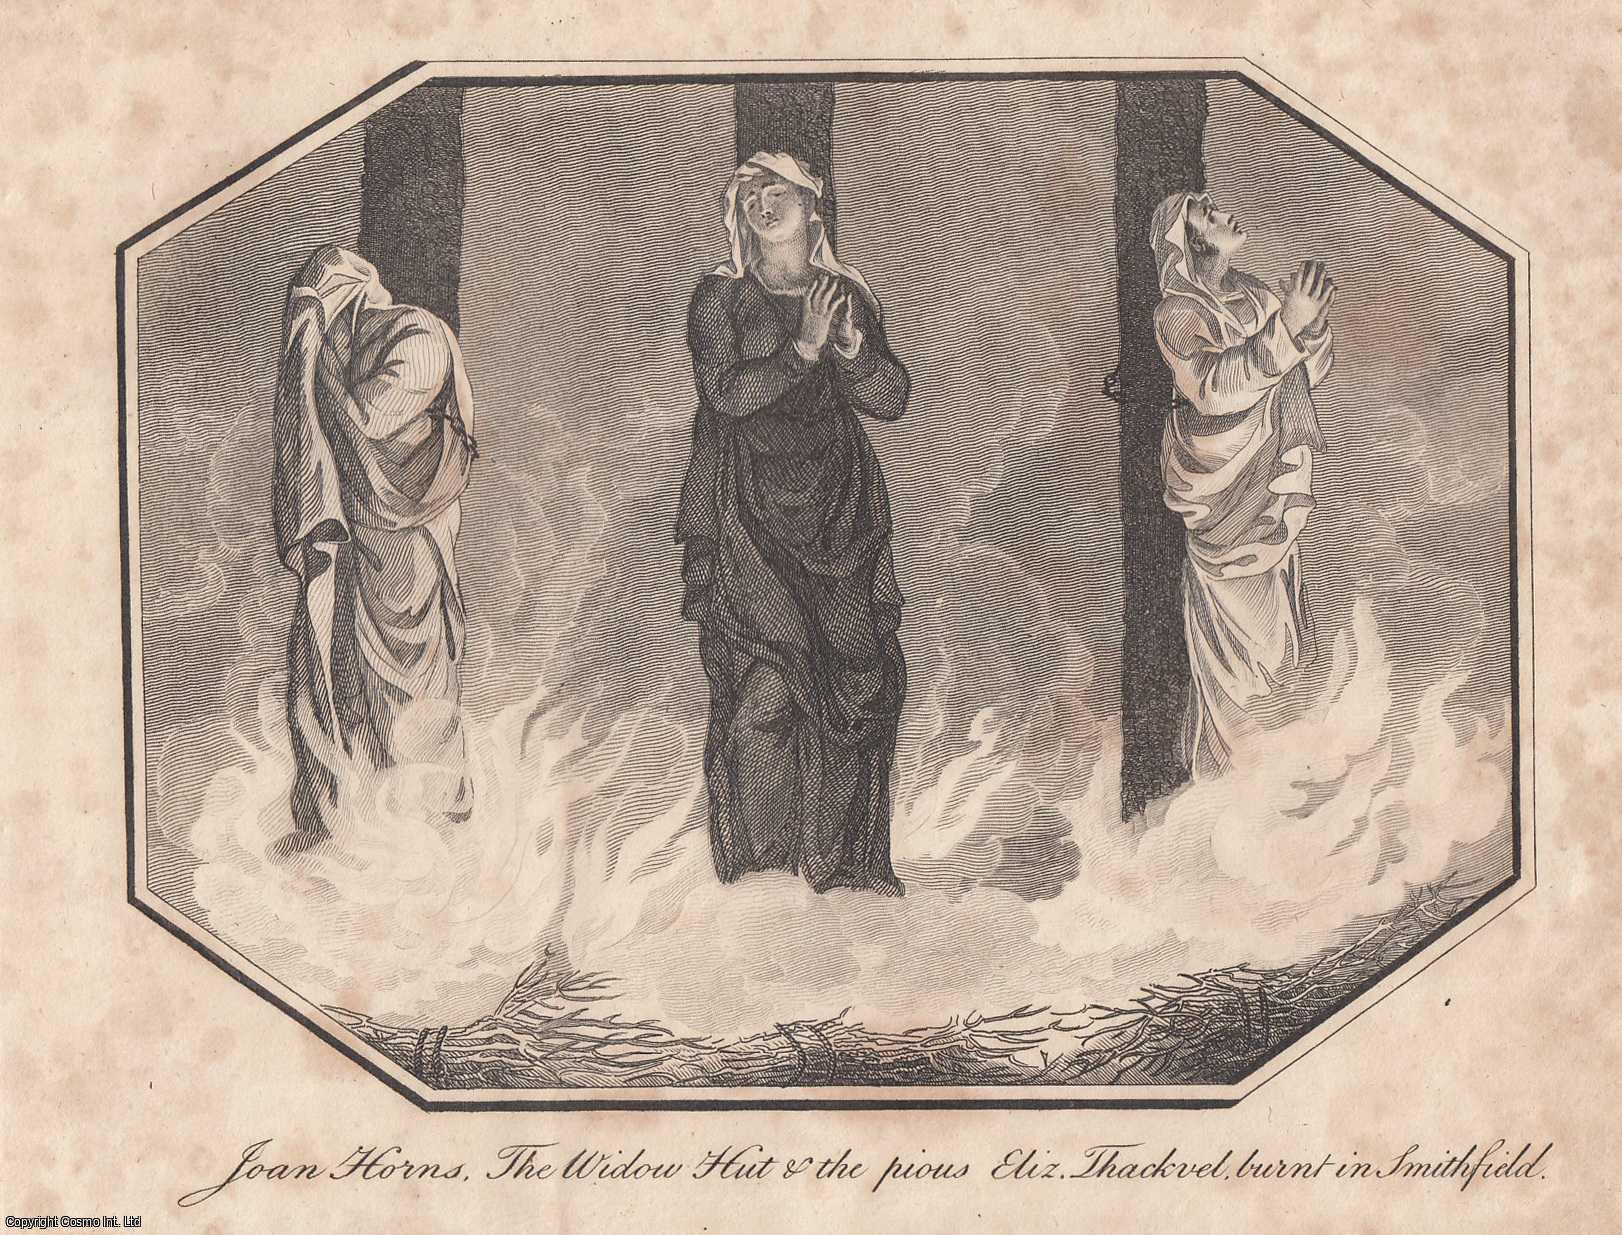 Foxe's Book of Martyrs - Engraving. Joan Horns, The Widow Hut, and the pious Elizabeth Thackvel burnt in Smithfield. This is an original 210 year old print separated from Foxe's Book of Martyrs, London, printed 1811.